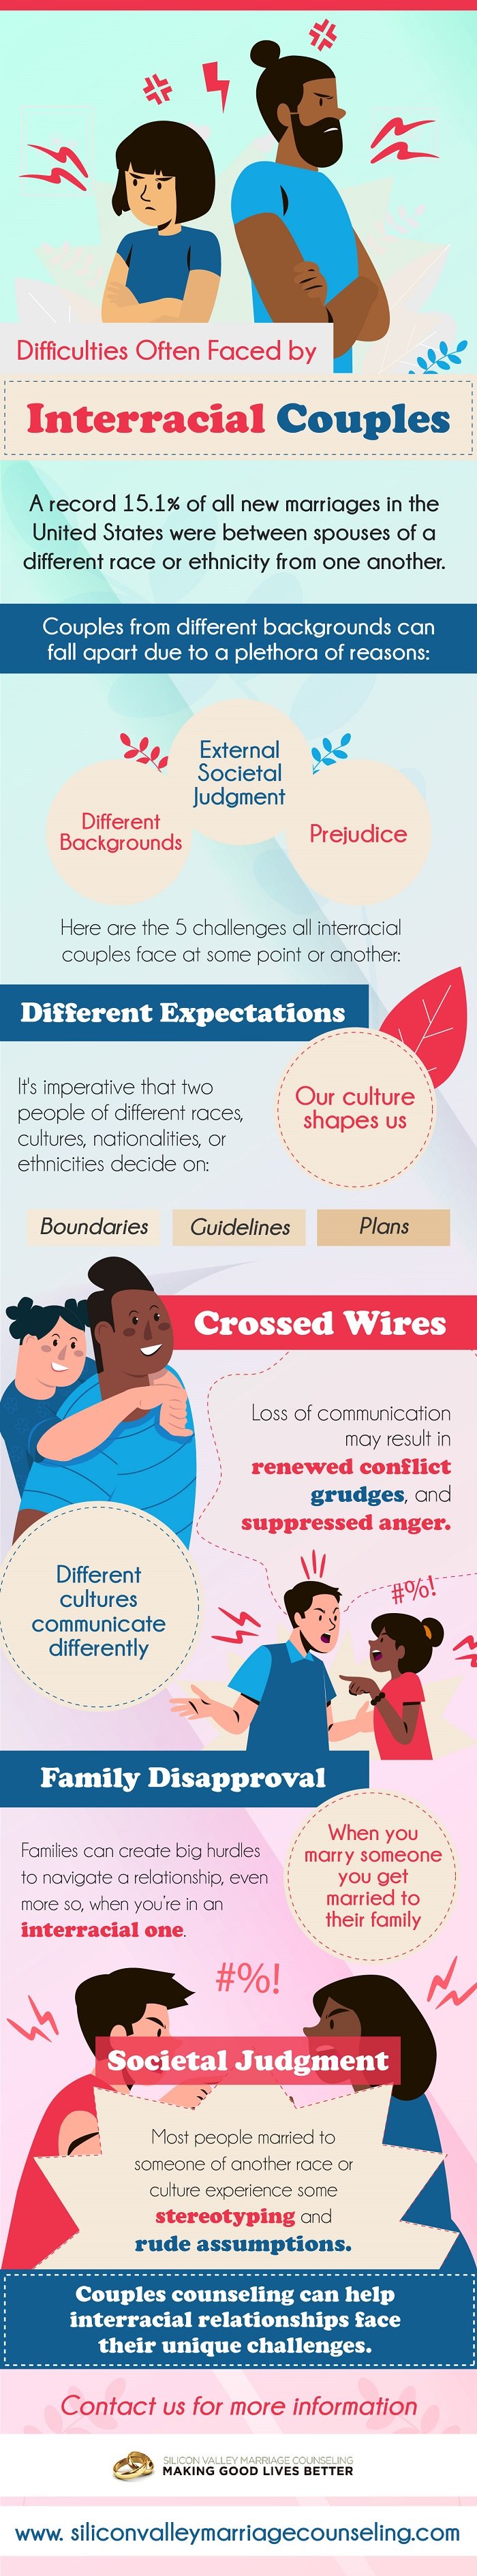 Difficulties Often Faced By Interracial Couples